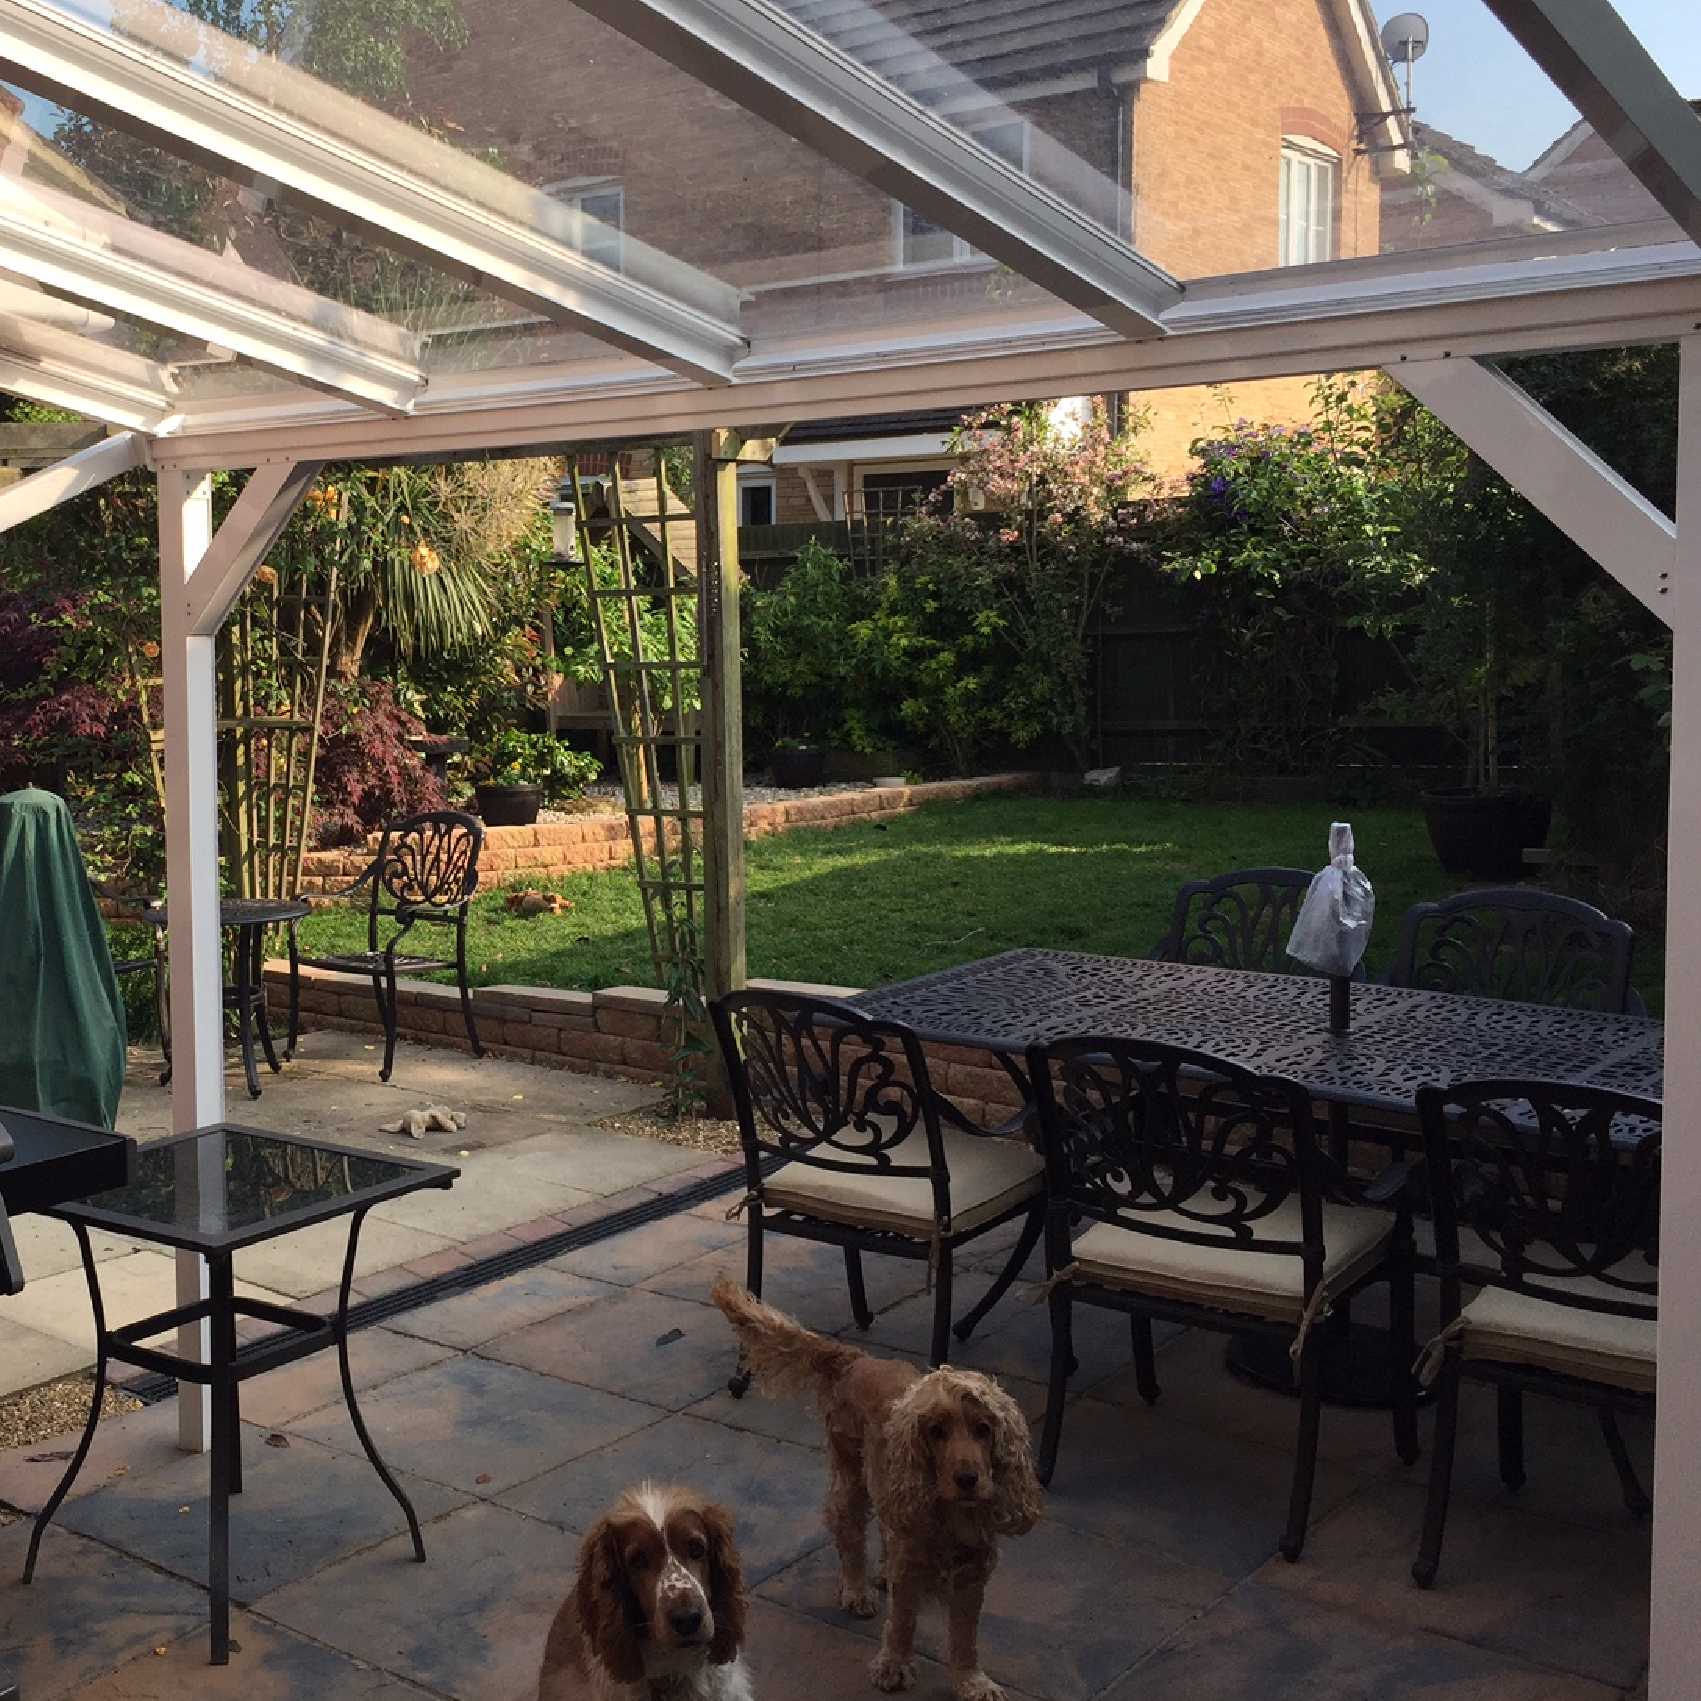 Affordable Omega Smart Lean-To Canopy, White UNGLAZED for 6mm Glazing - 5.6m (W) x 2.0m (P), (3) Supporting Posts